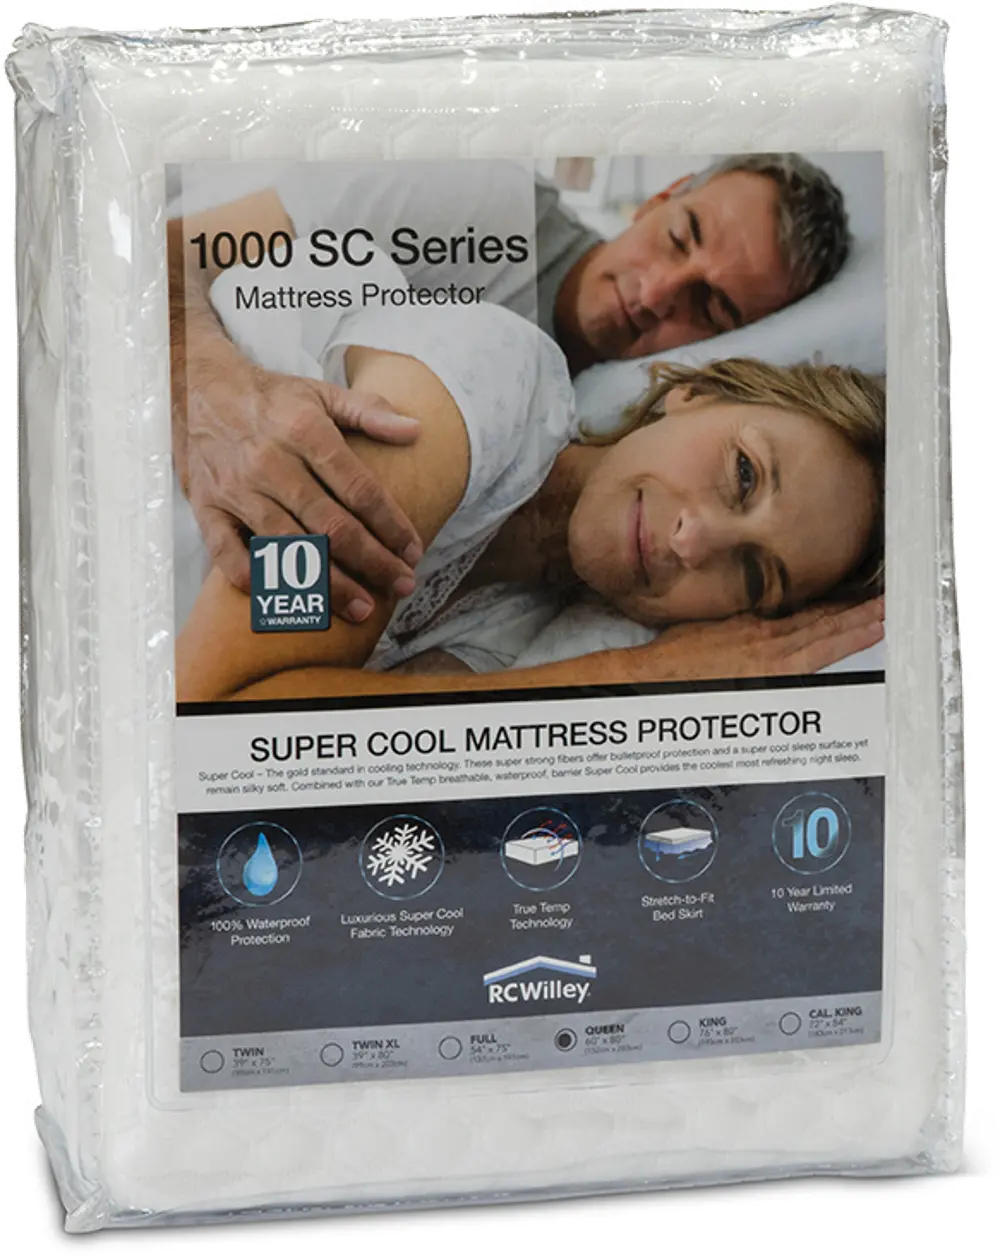 SuperCool Split California King Mattress Pad and 10-Year Limited Protection Plan - 1000 SC-1